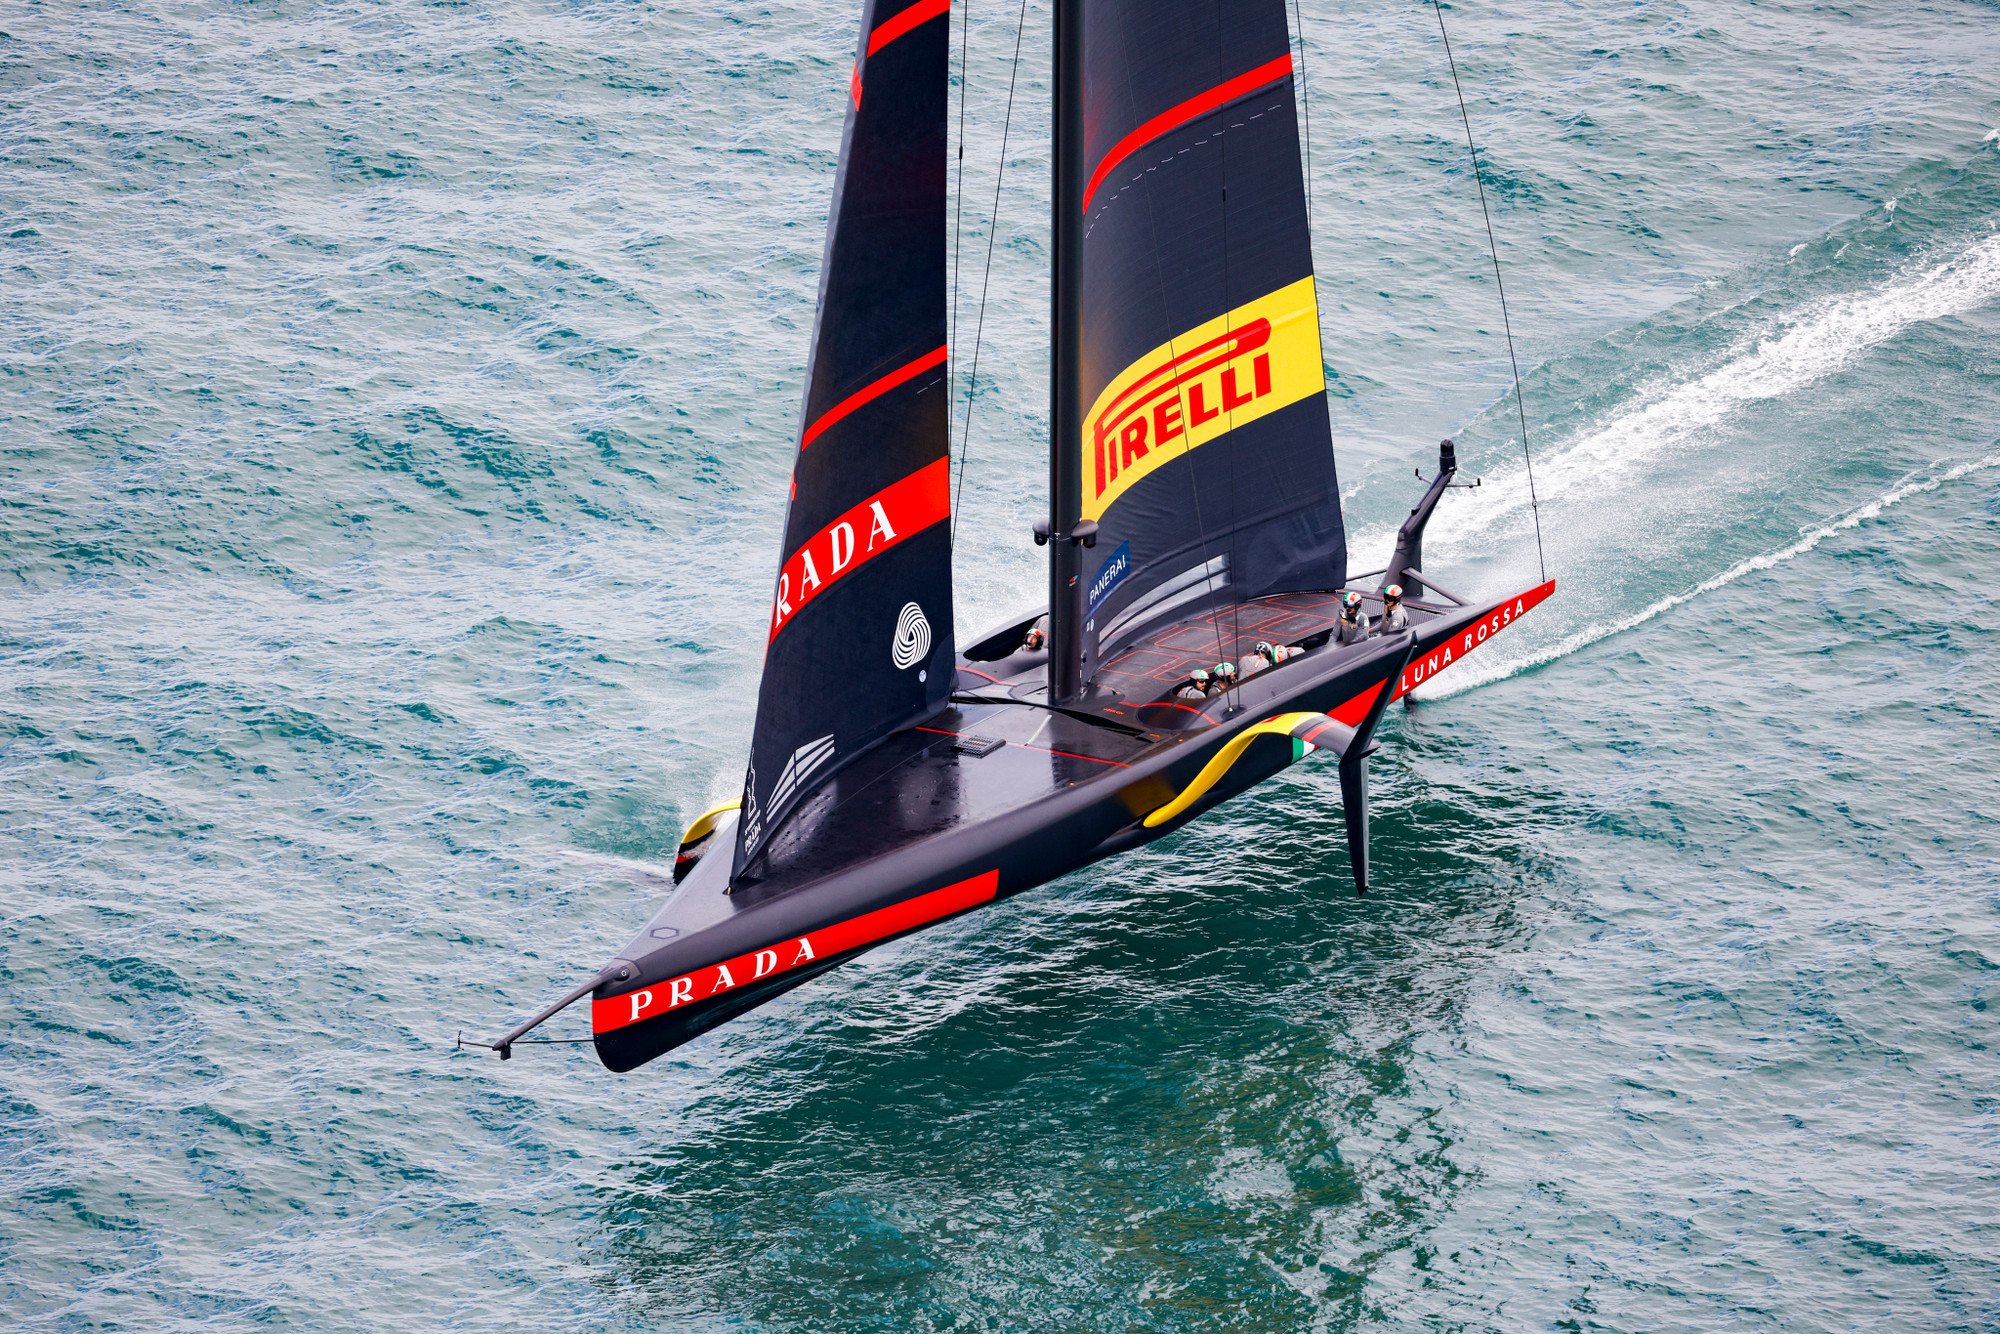 The Italian yacht of Team Luna Rossa shown in action during the ninth race  (Flight 9) of Louis Vuitton Cup, the challengers' regatta for the 'America's  Cup', off the coast of Valencia